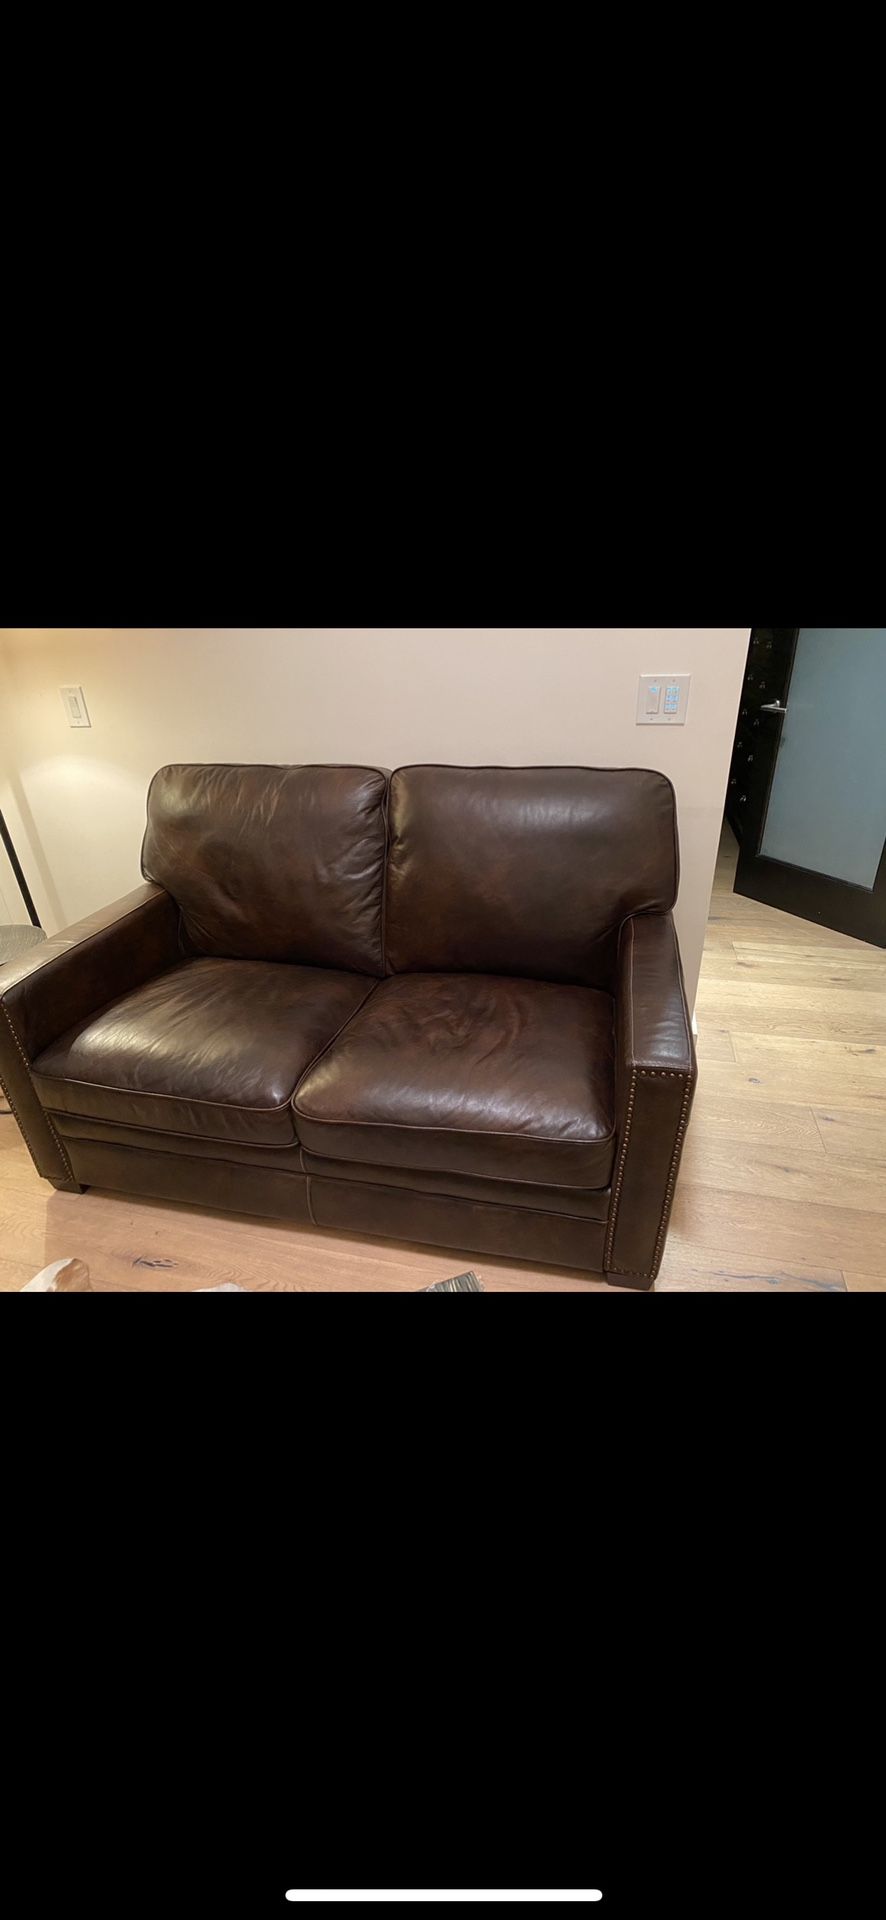 100% leather love seat couch